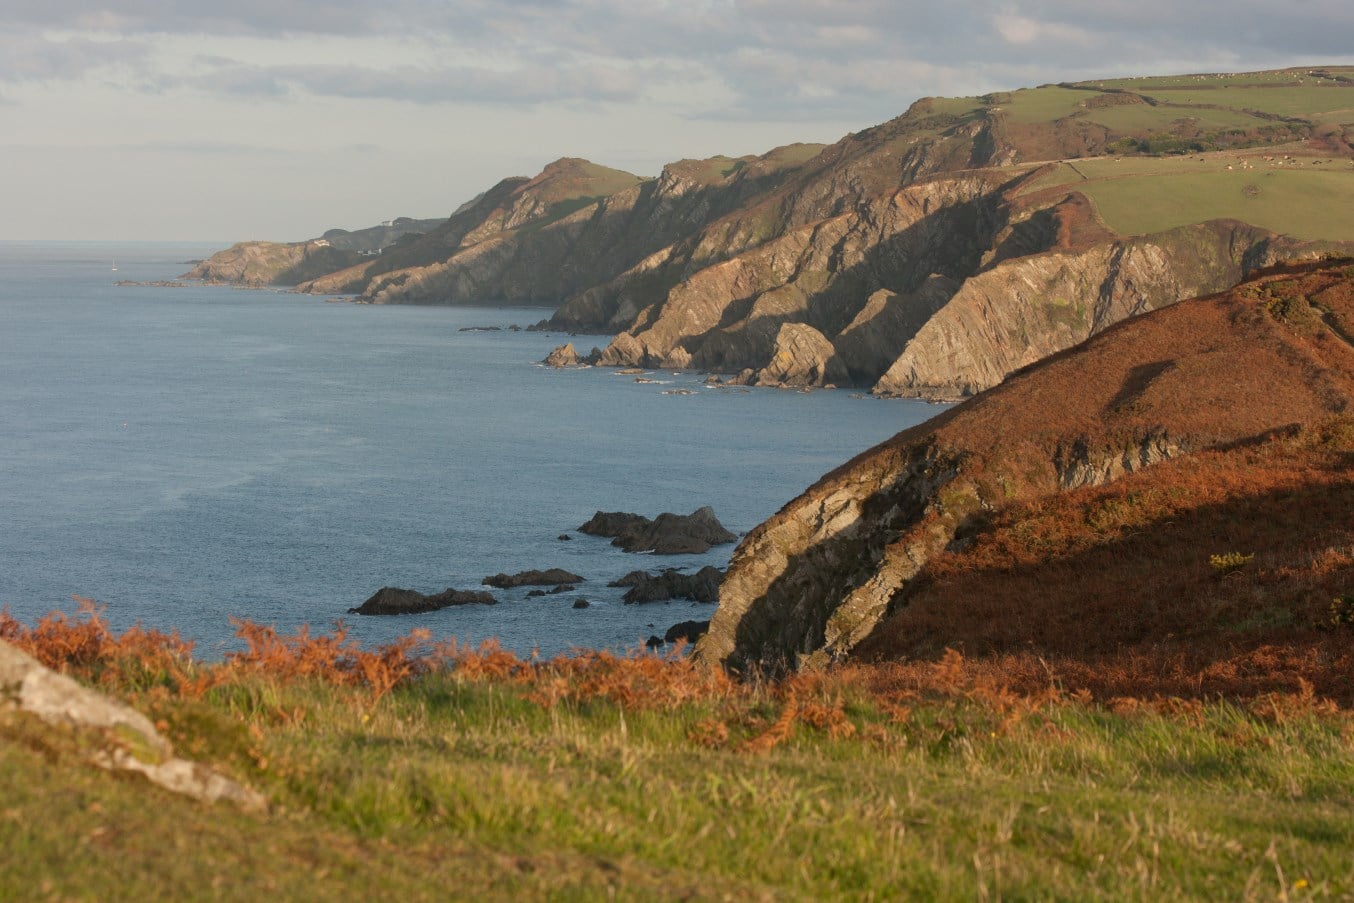 View towards Lee and Ilfracombe from Bull Point. October 2011.